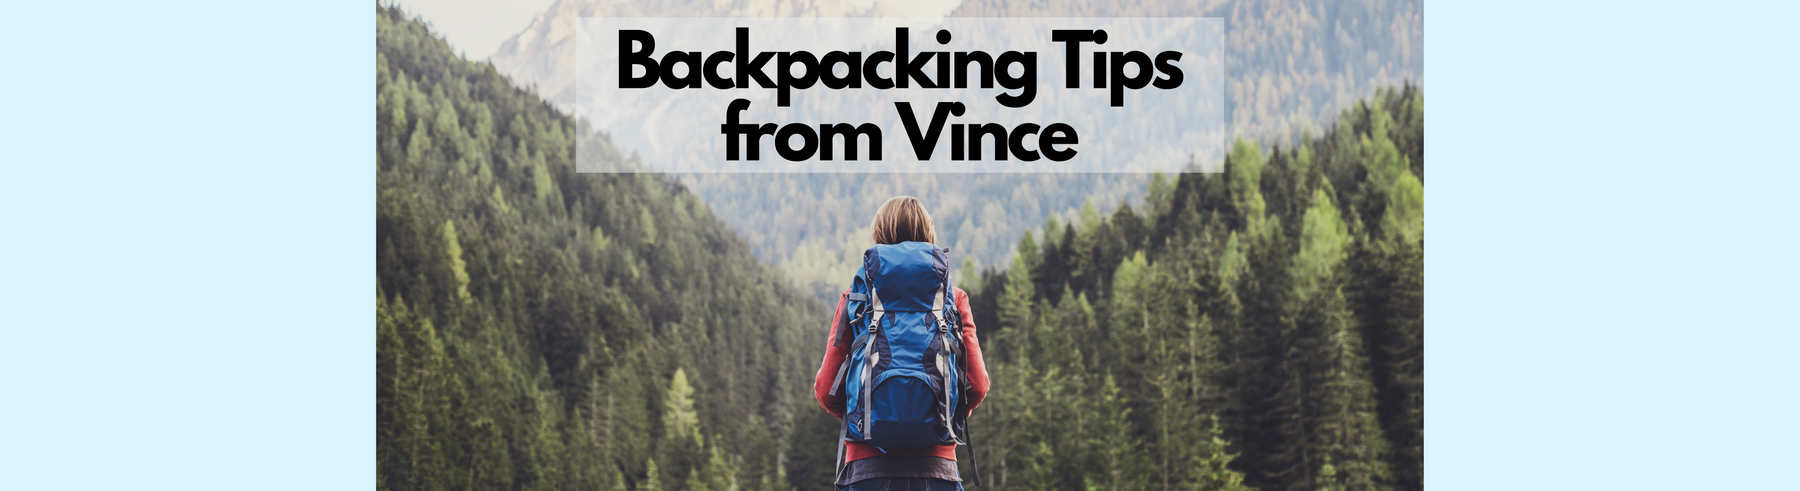 Backpacking Tips from Vince at Walkabout